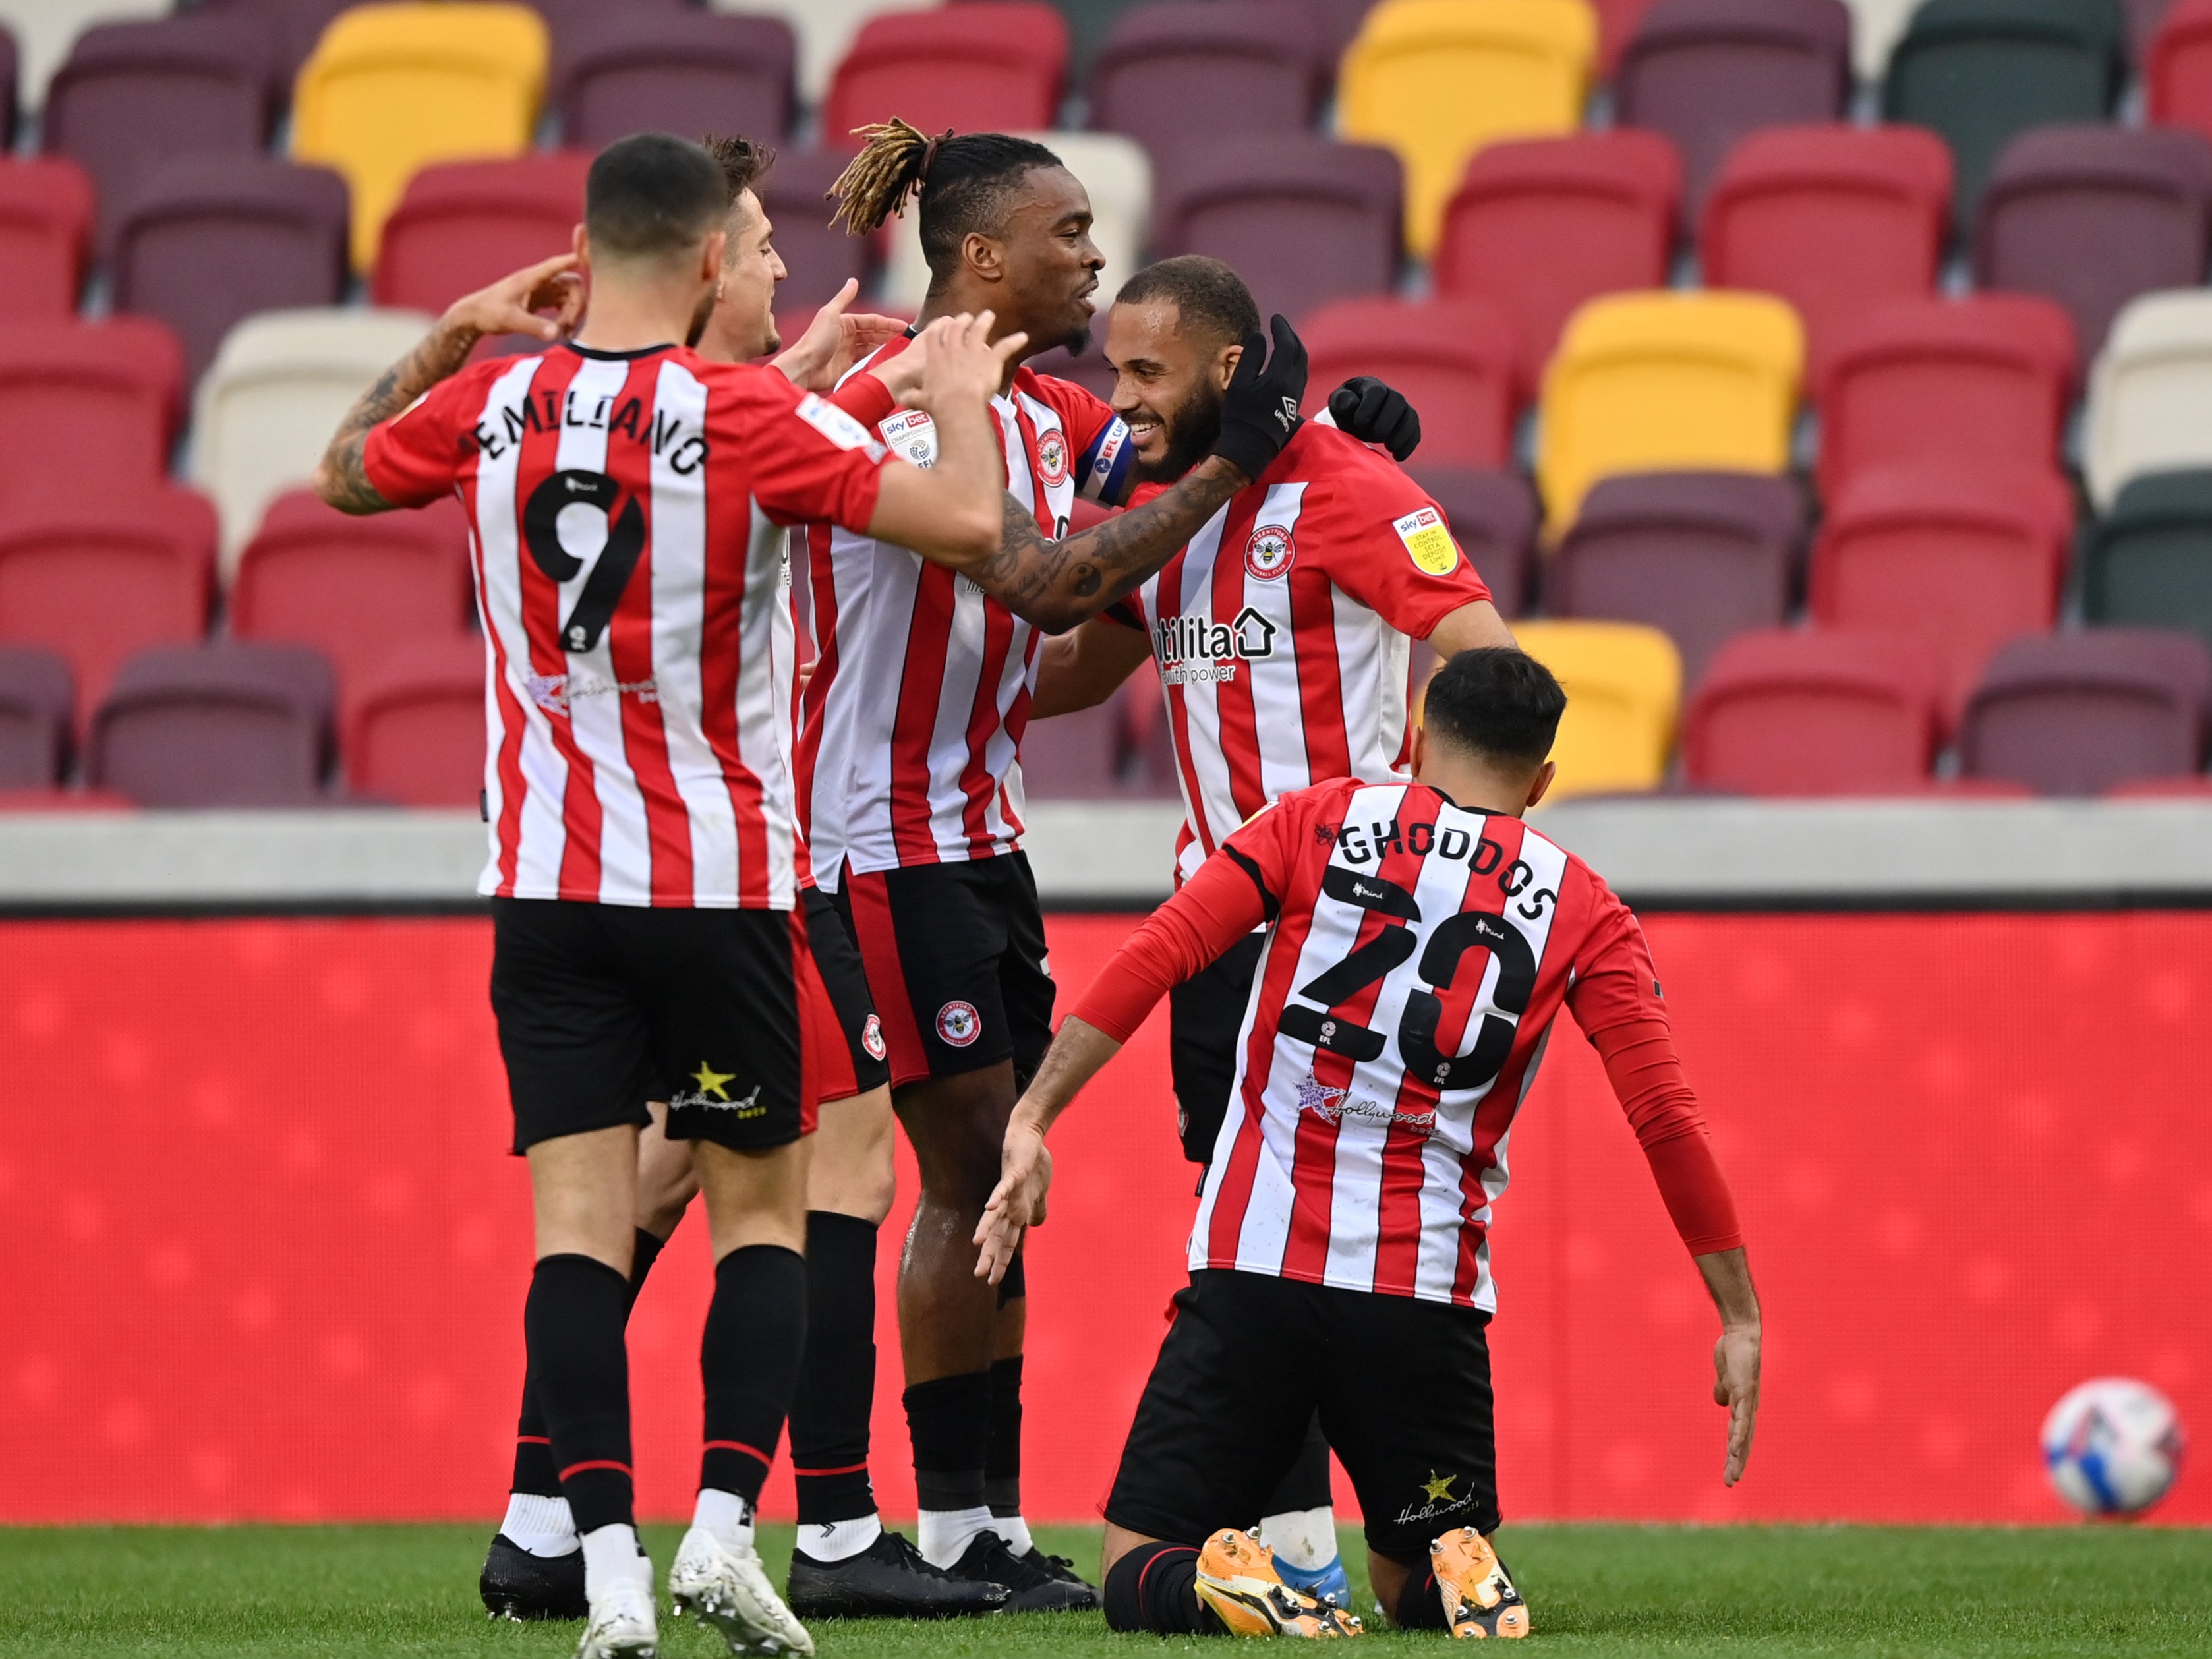 Brentford will face Swansea in the playoff final